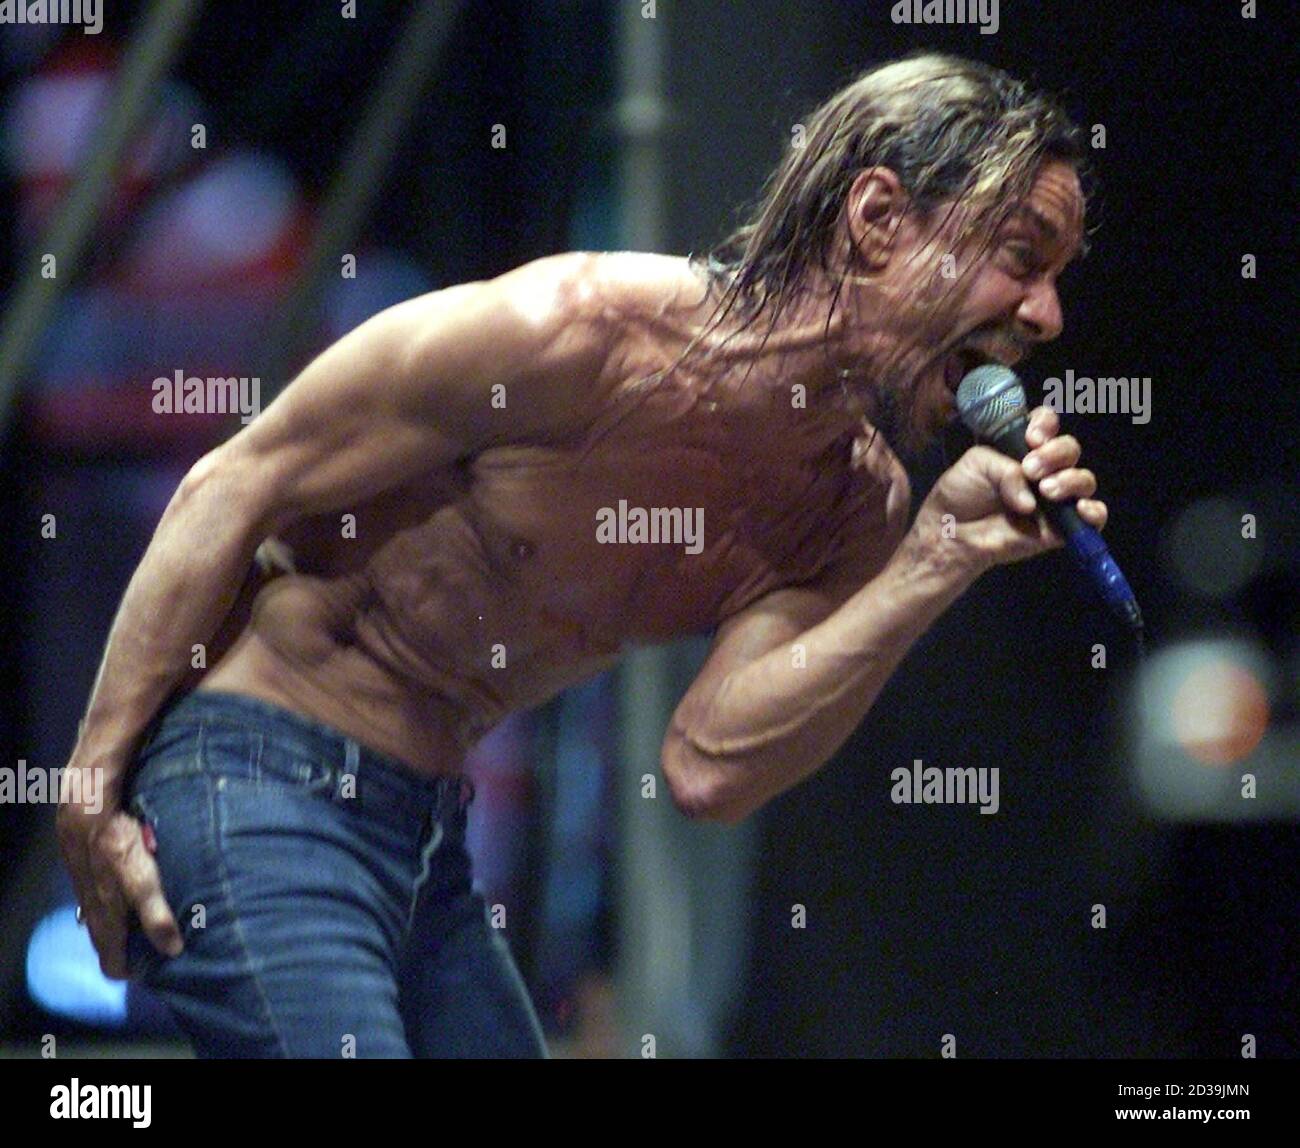 U.S. pop star Iggy Pop performs during Budapest's one-week,  around-the-clock Youth Island festival on a Danube island on August 2,  2002. One of Europe's largest open-air festivals usually draws crowds of  around